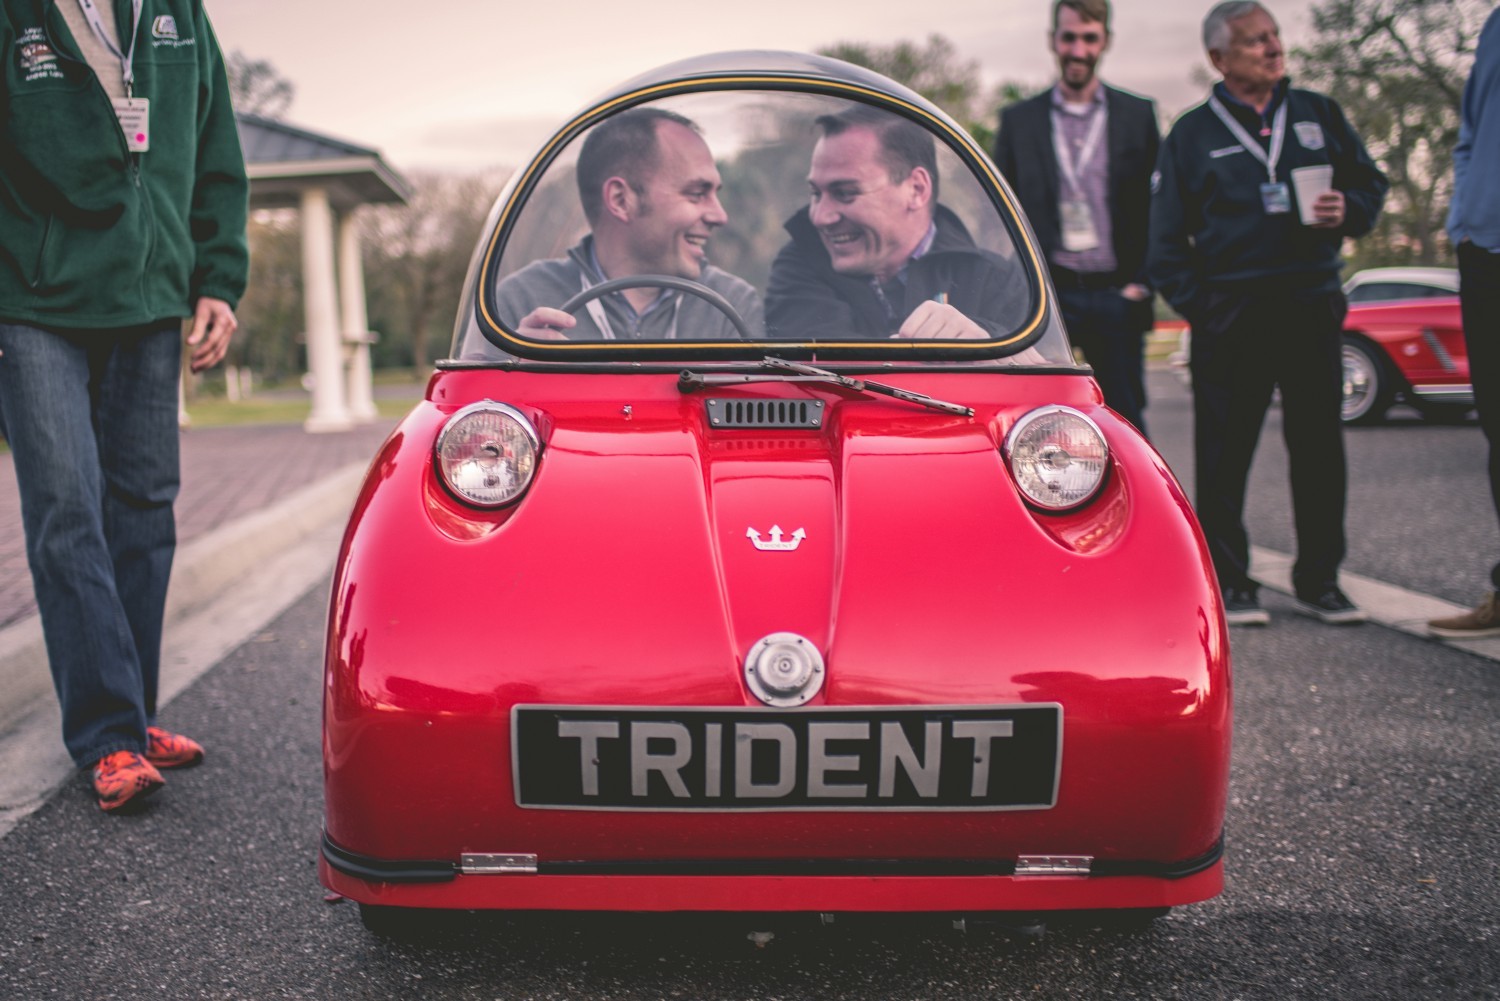 Team members squeezing in for a ride in a 1965 Peel Trident. Fun fact: you can fit 31 Trident’s in a two-car garage